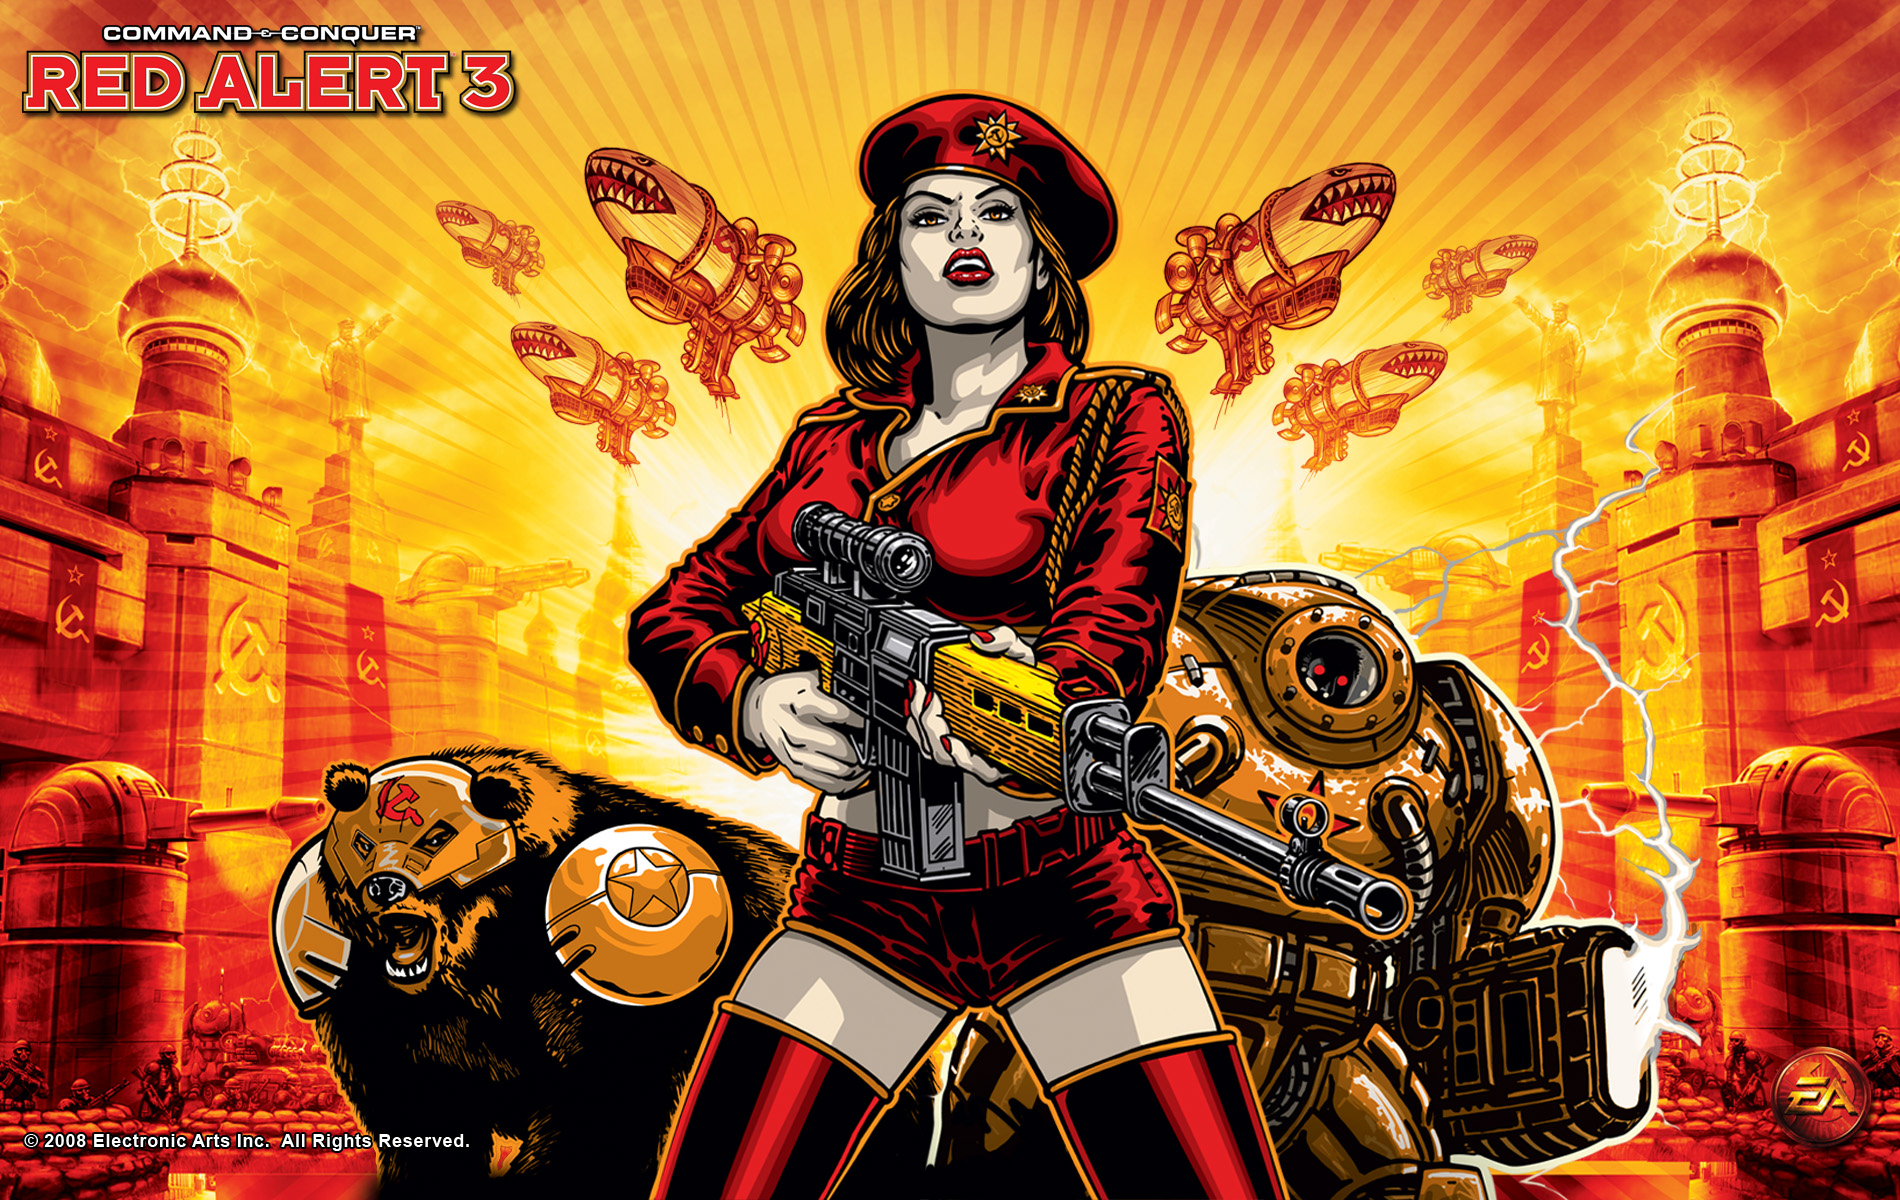 Red Alert 3 - Command & Conquer